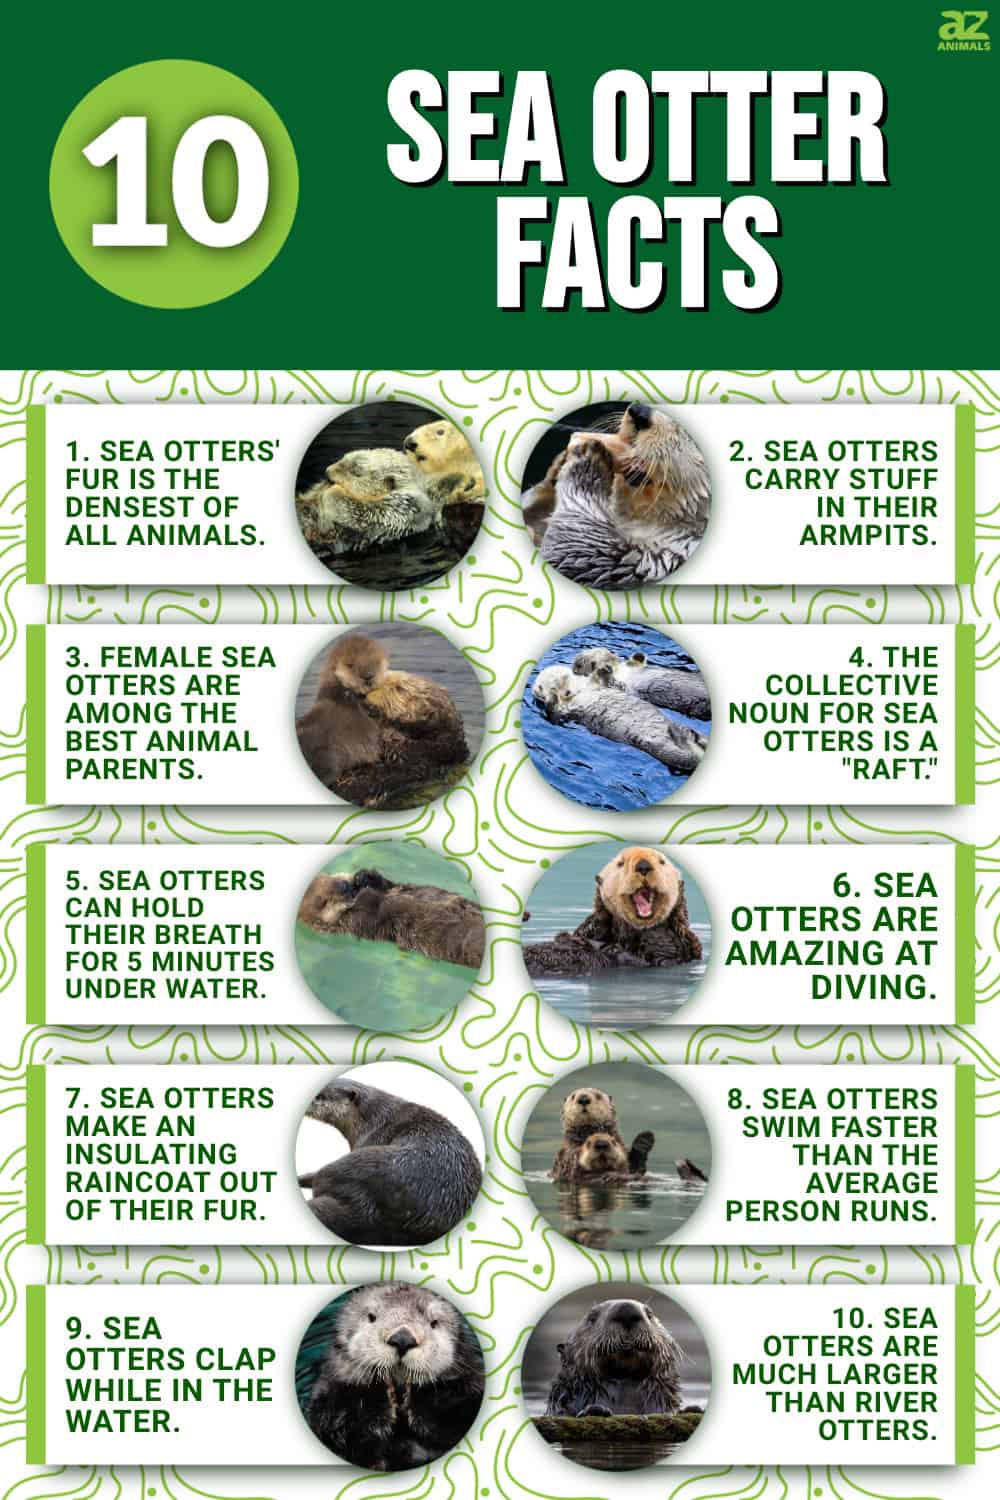 10 Incredible Sea Otter Facts - A-Z Animals